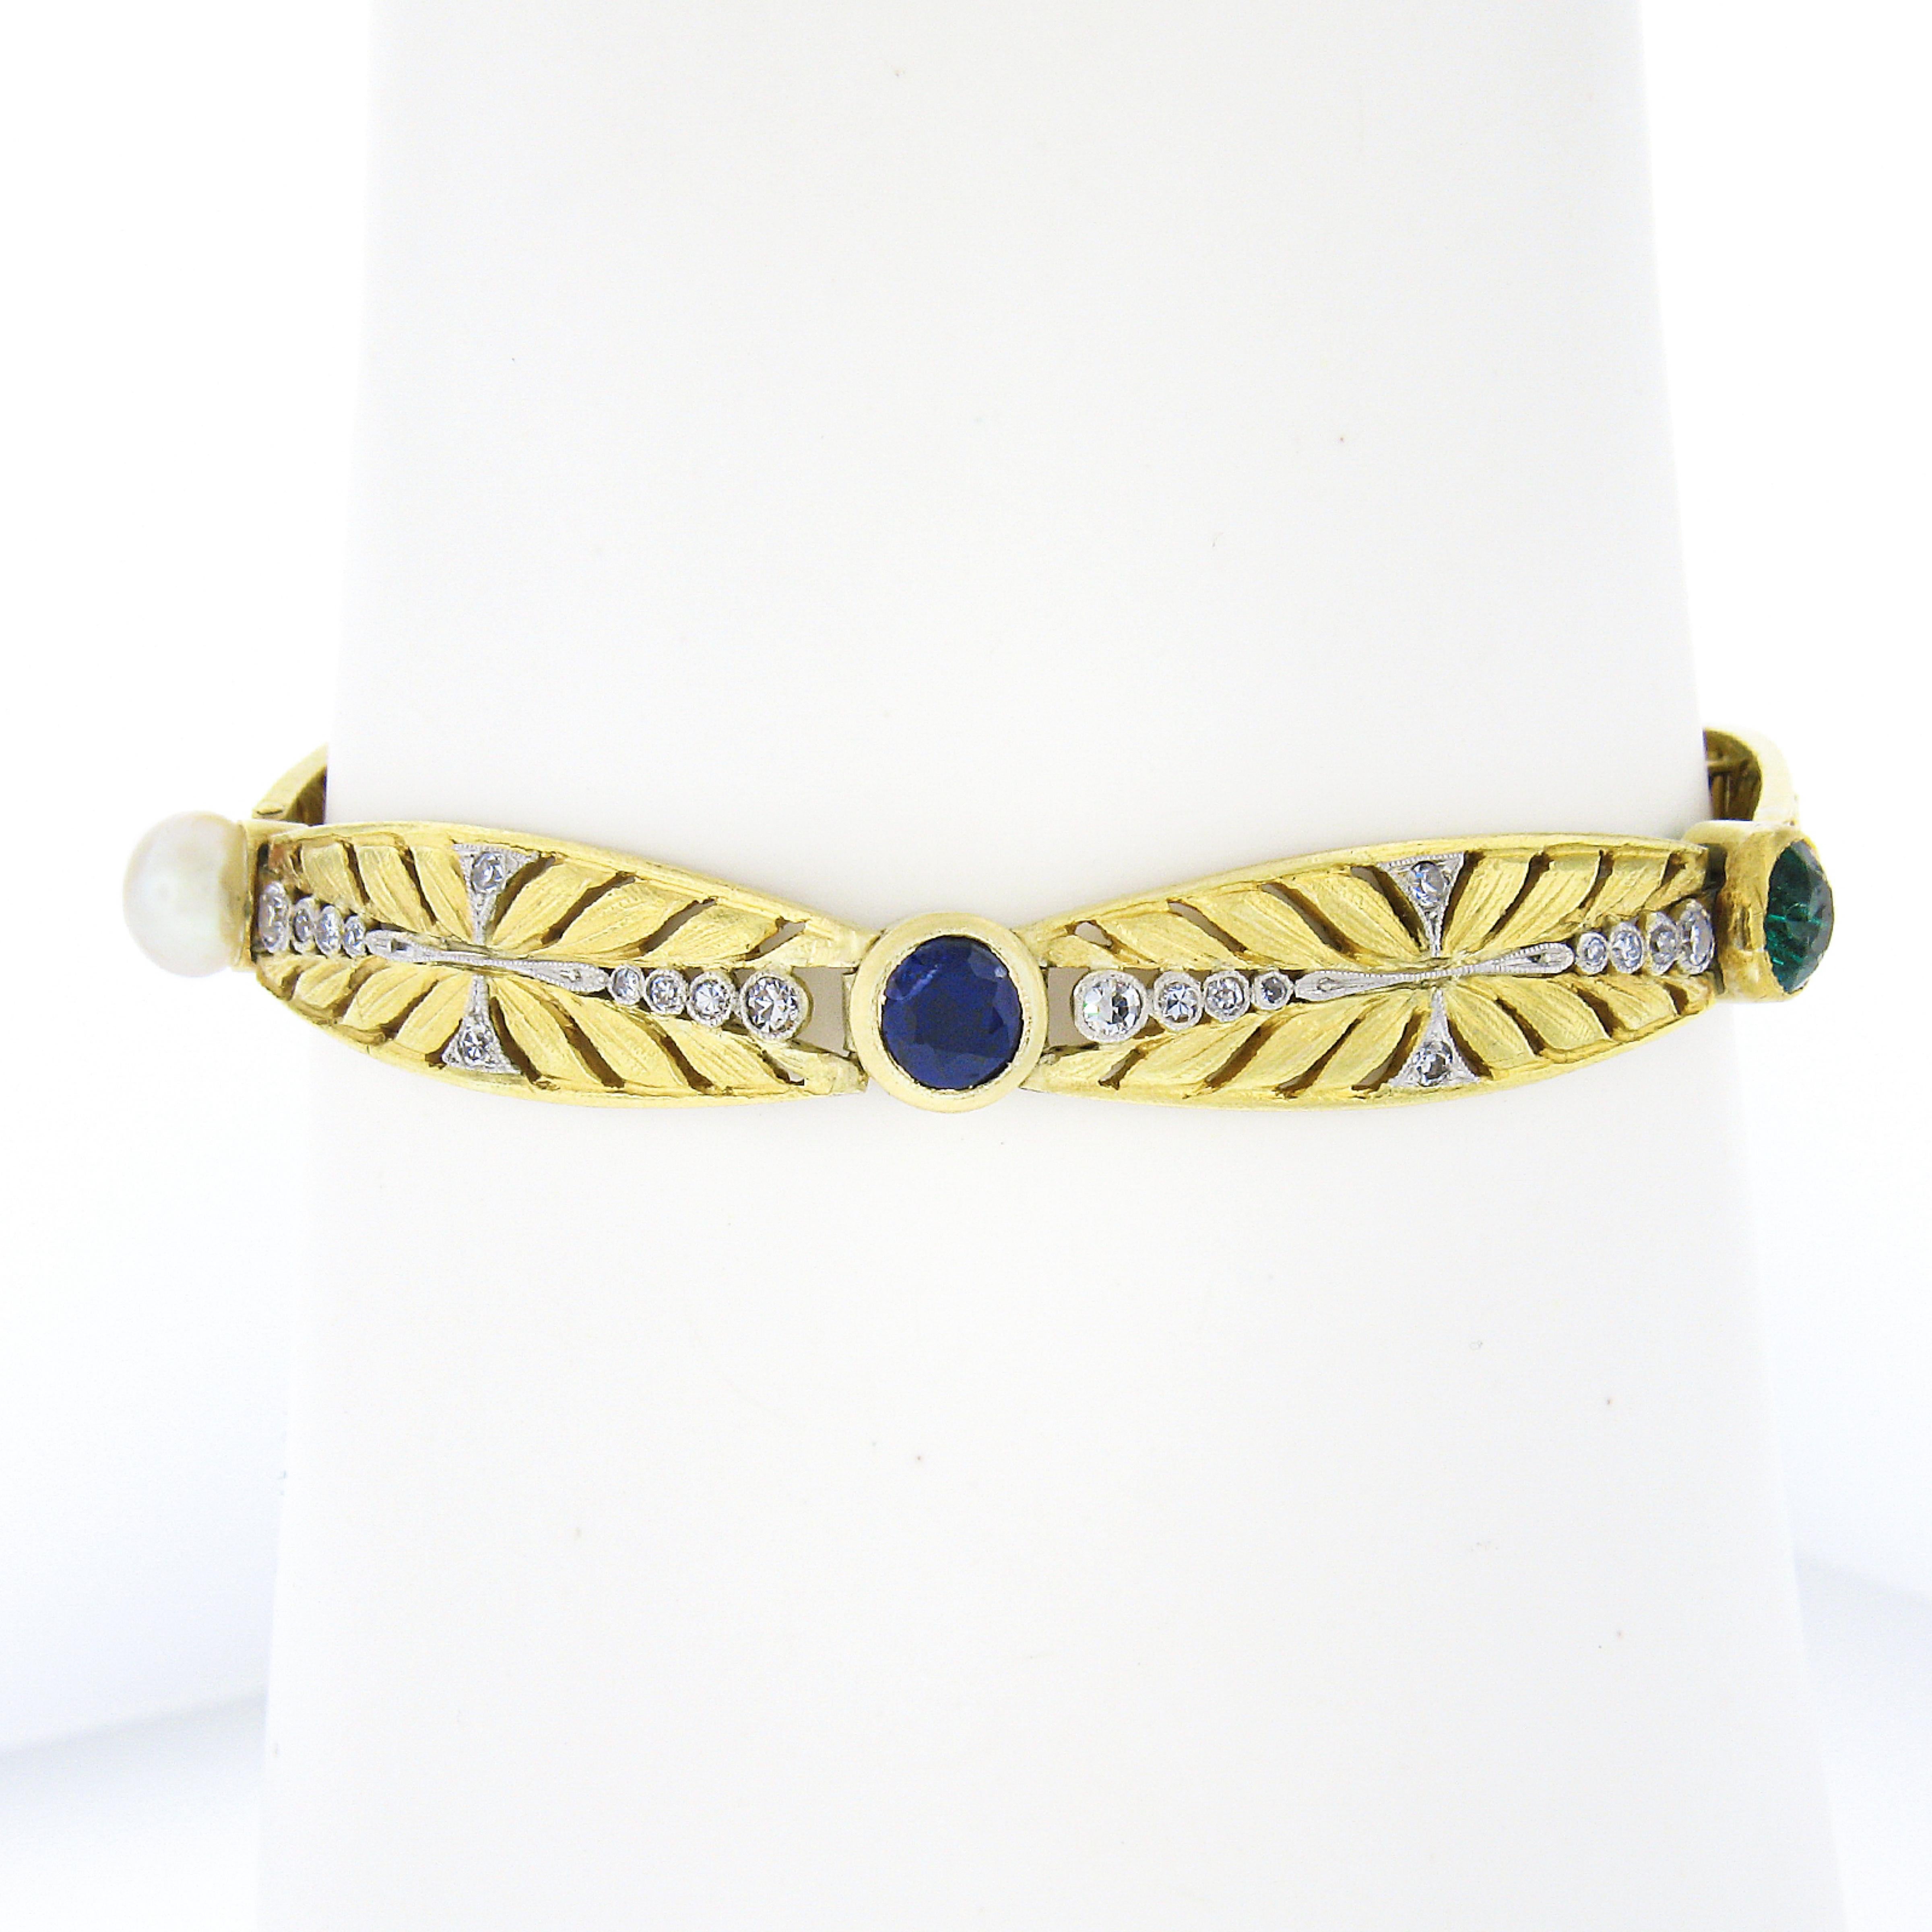 This magnificent and truly elegant antique Edwardian period bracelet was crafted in France from solid 18k yellow gold and features outstanding floral leaf open work links with fine quality sapphires, emeralds, and a pearl neatly set in-between. A